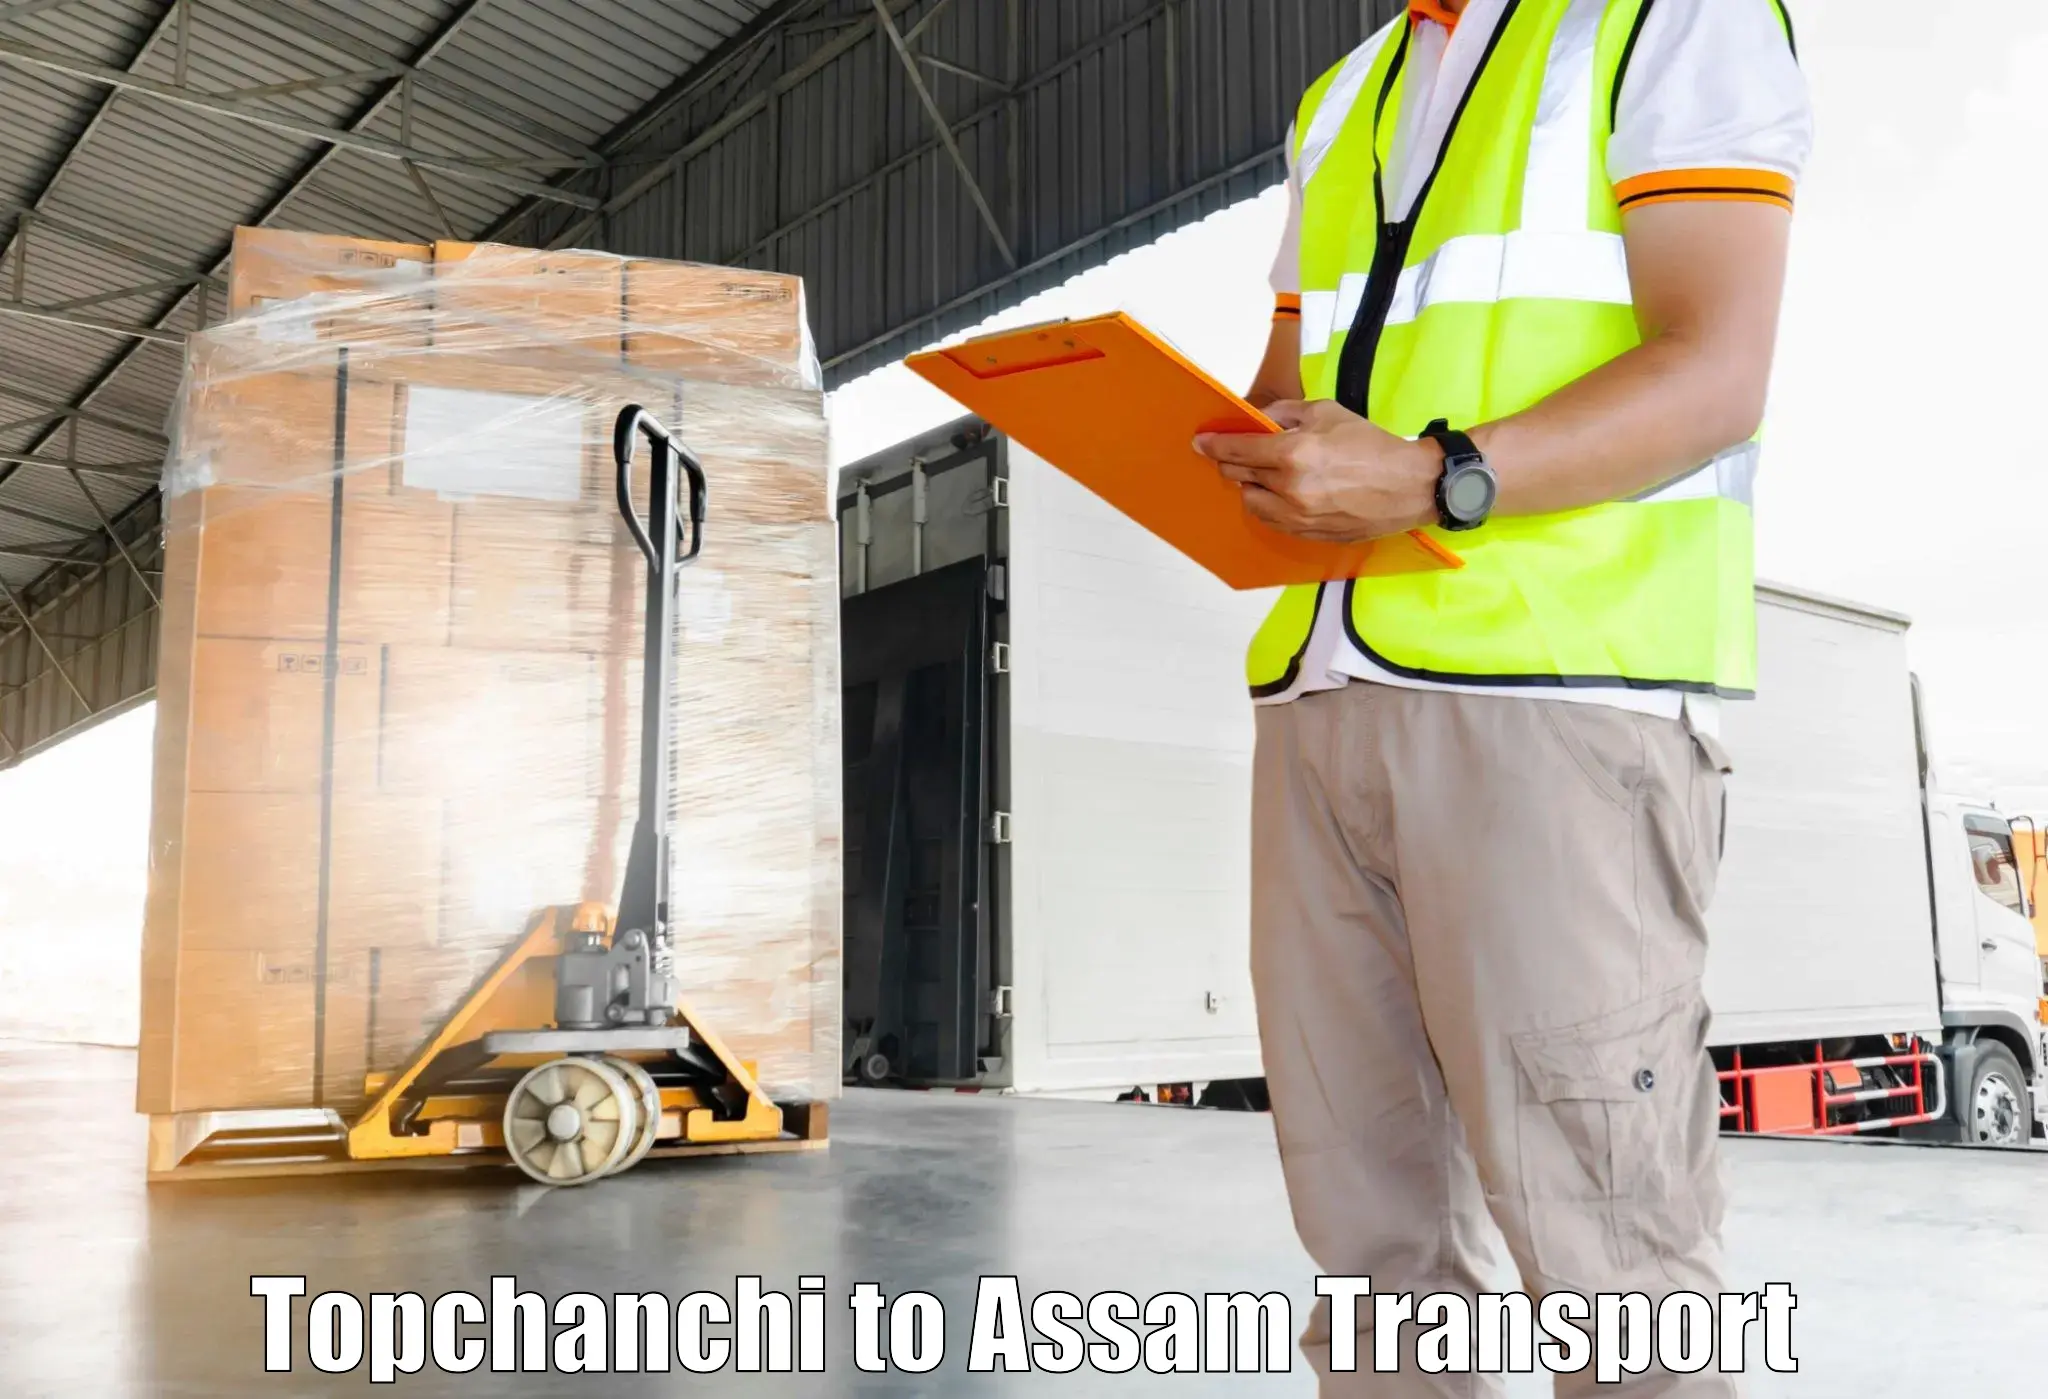 Two wheeler parcel service Topchanchi to Mariani